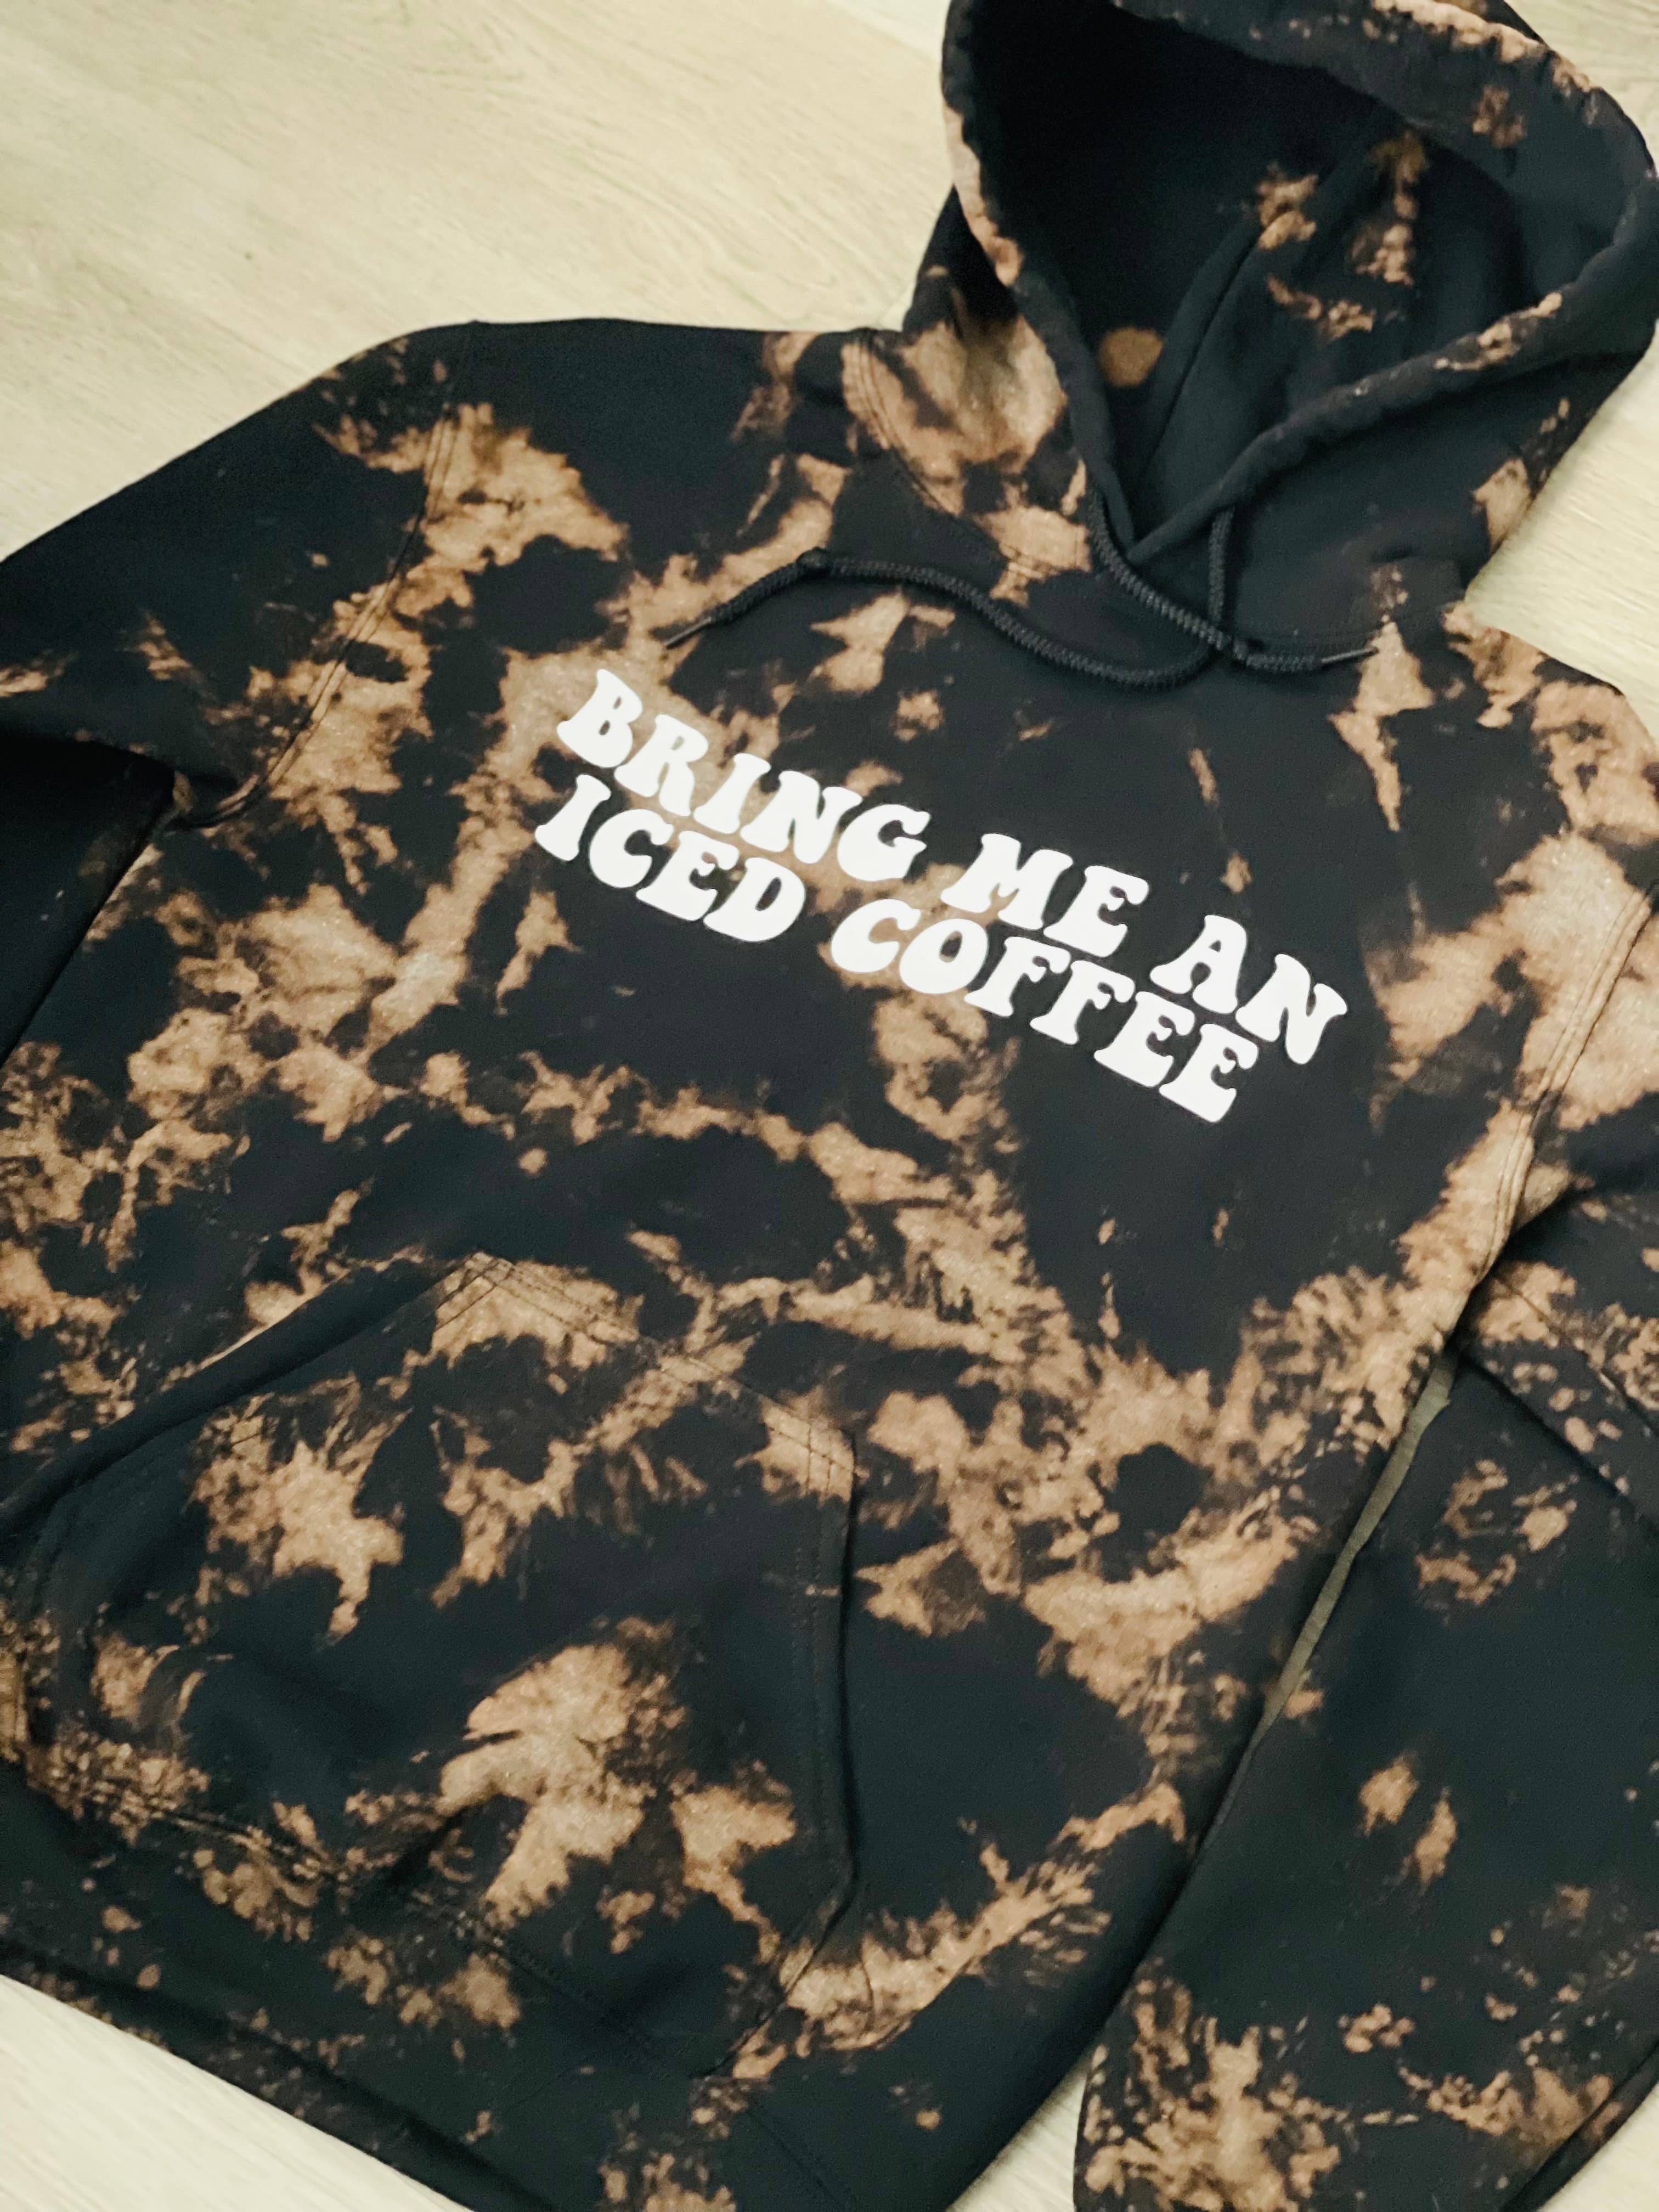 Sublimation 100% Polyester Sweatshirt Leopard Sublimation Hoodie Ready to Ship Hard-to-Find Sublimation Lightweight Cheetah Sweatshirt